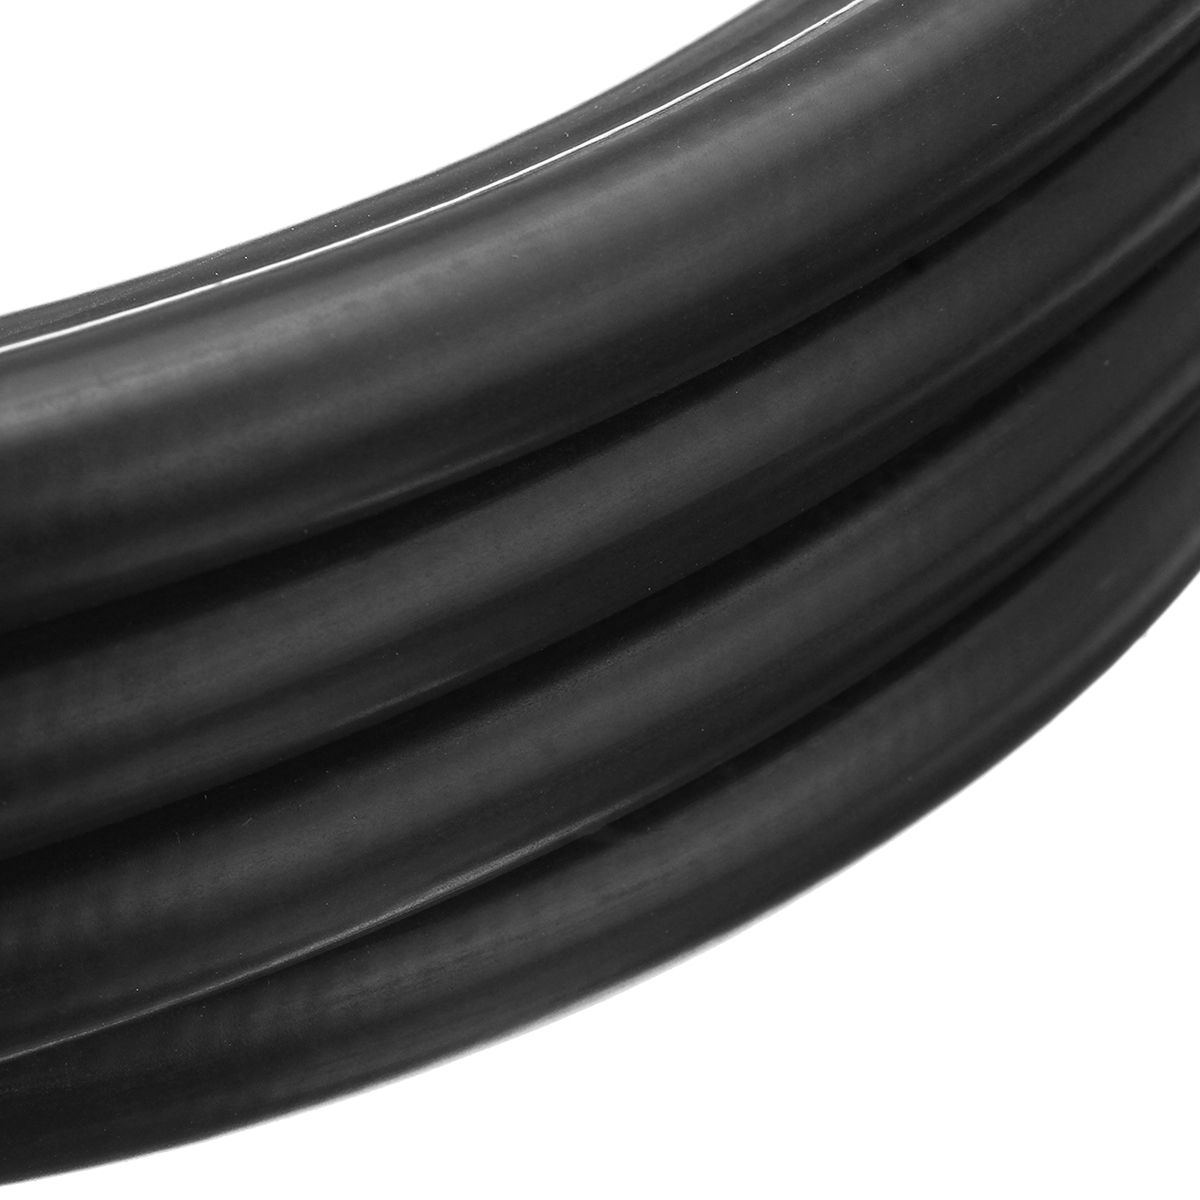 456m-Pressure-Washer-Hose-For-KARCHER-K-Series-Quick-Fit-Click-Yellow-Trigger-NSNS-TR-1375683